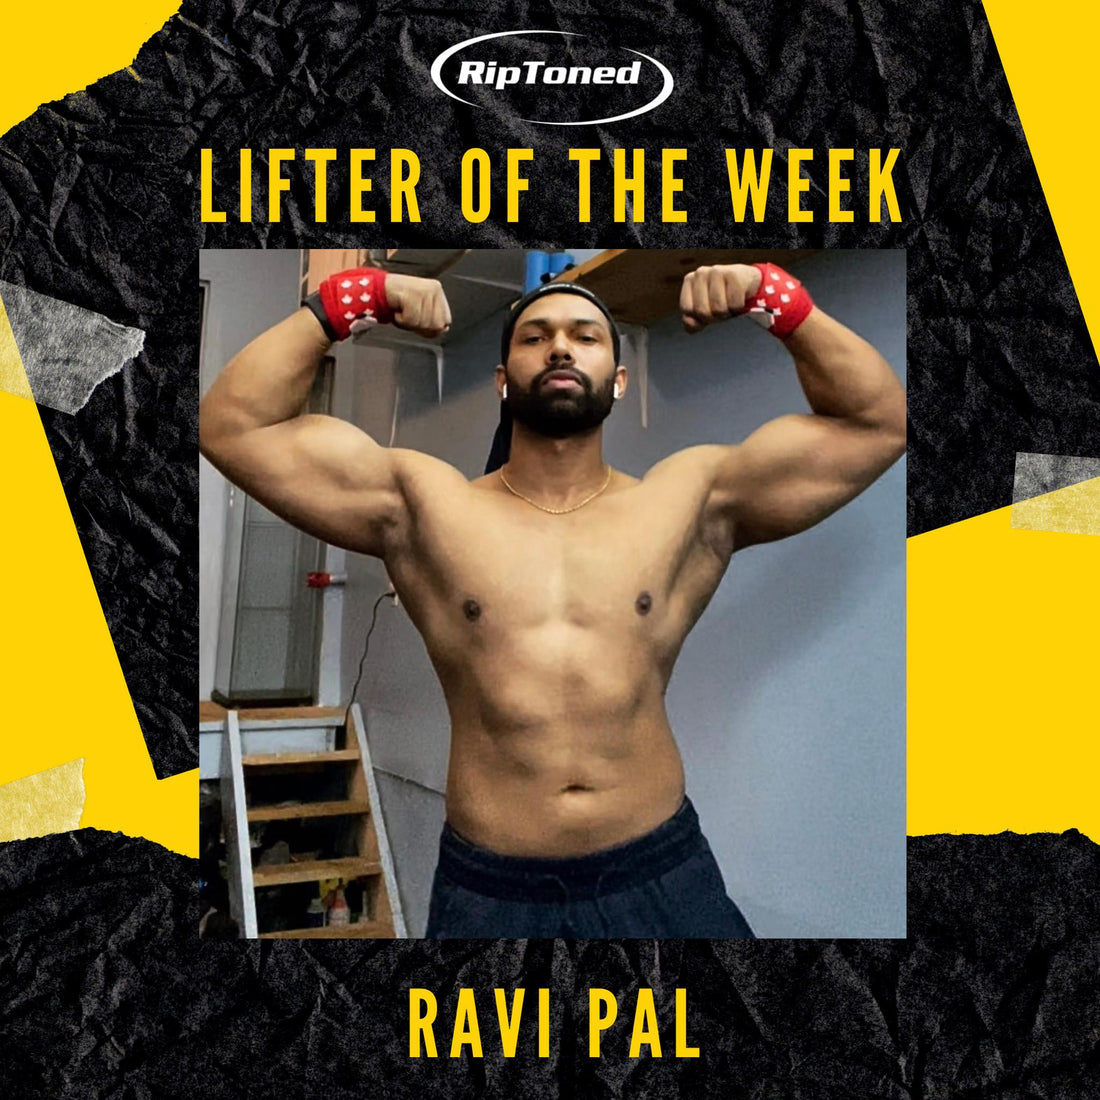 Lifter of the Week - Ravi Pal - Rip Toned